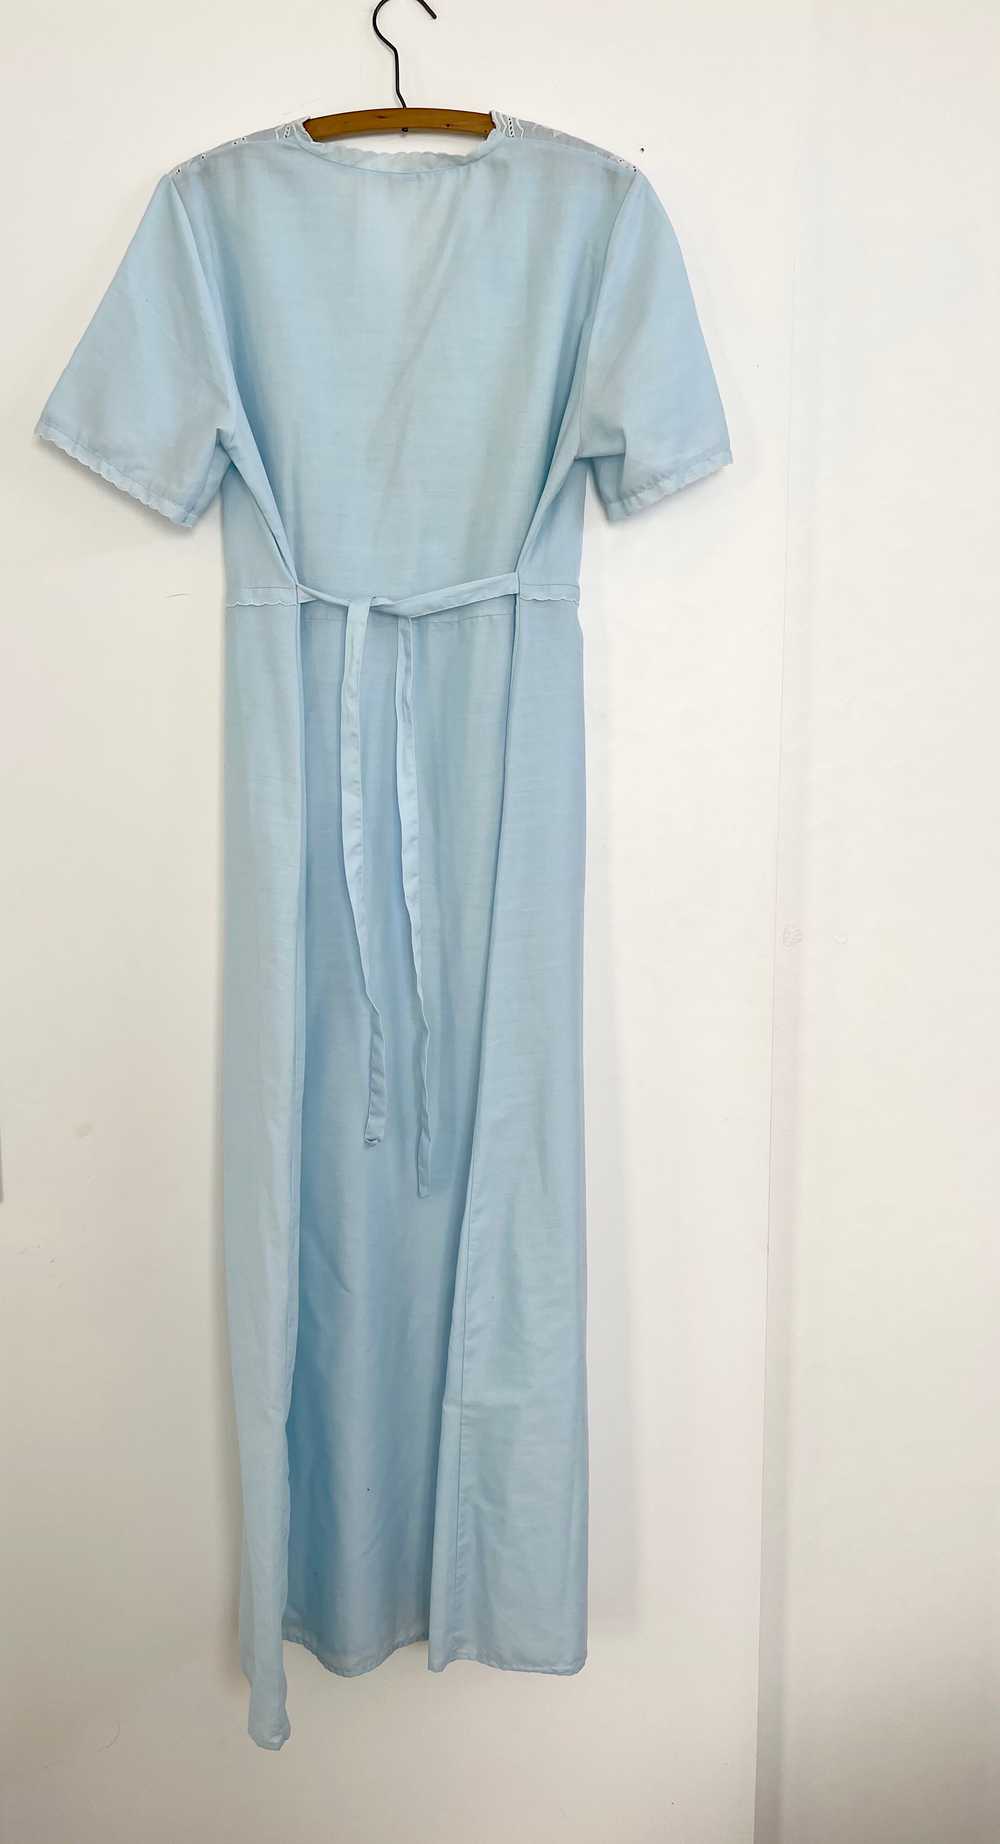 Pale Blue 40's Inspired Dress - image 5